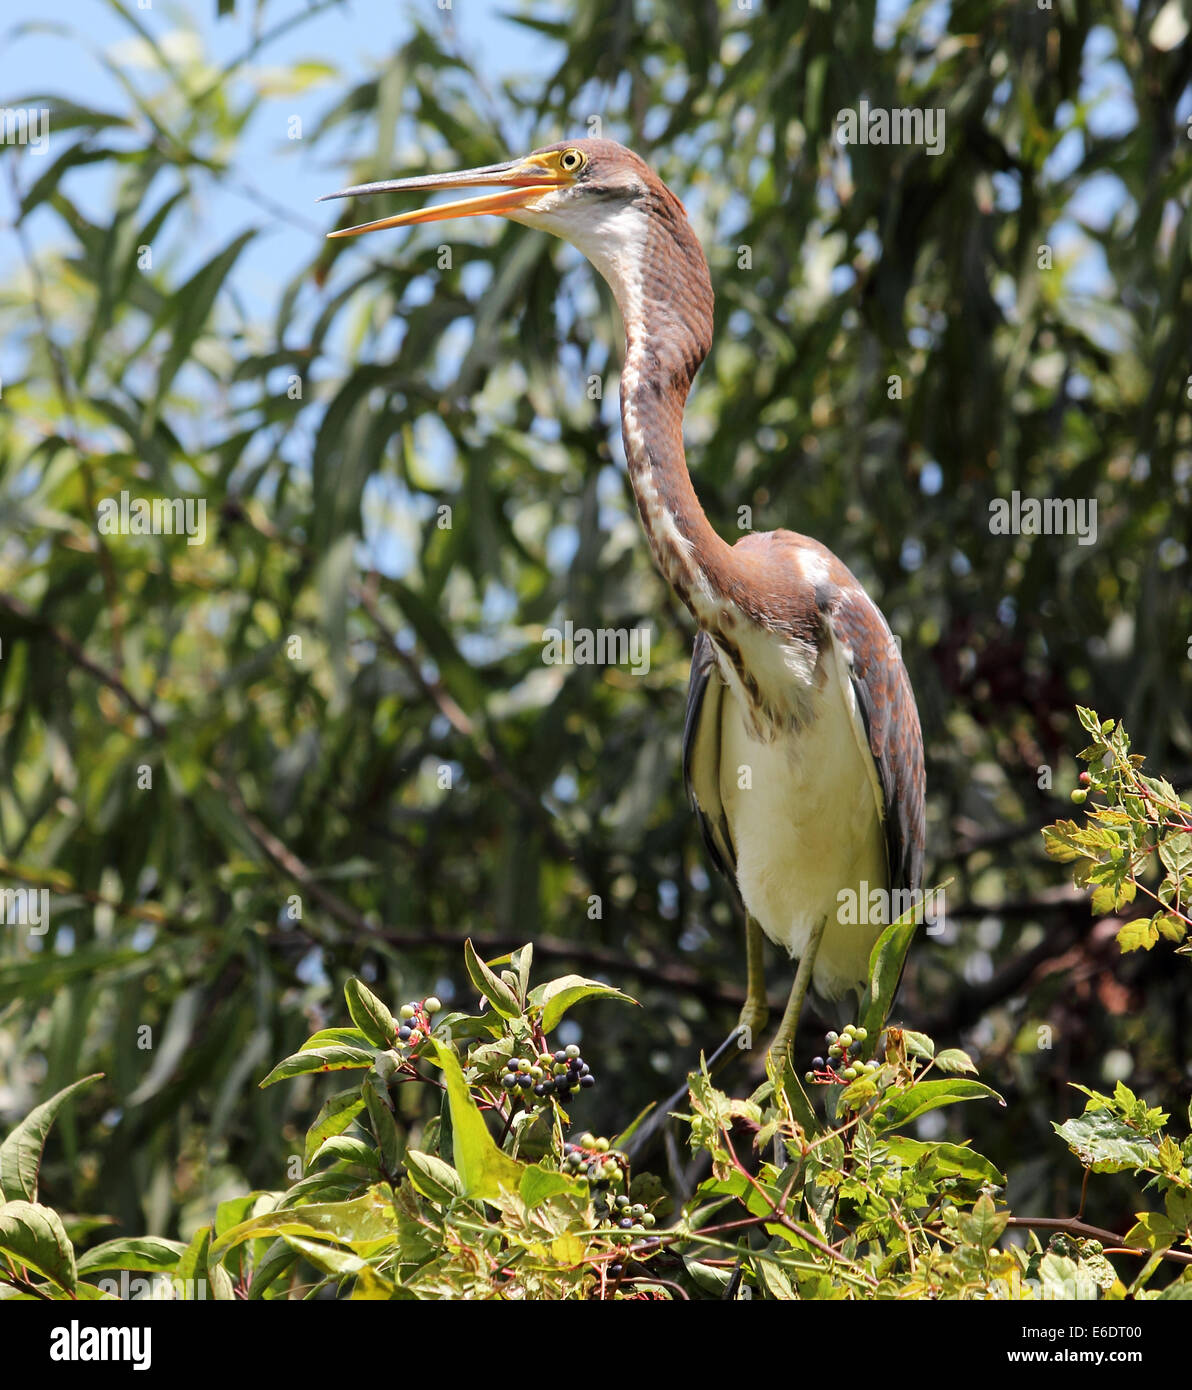 A young Tricolored heron perches in a nesting tree. Stock Photo